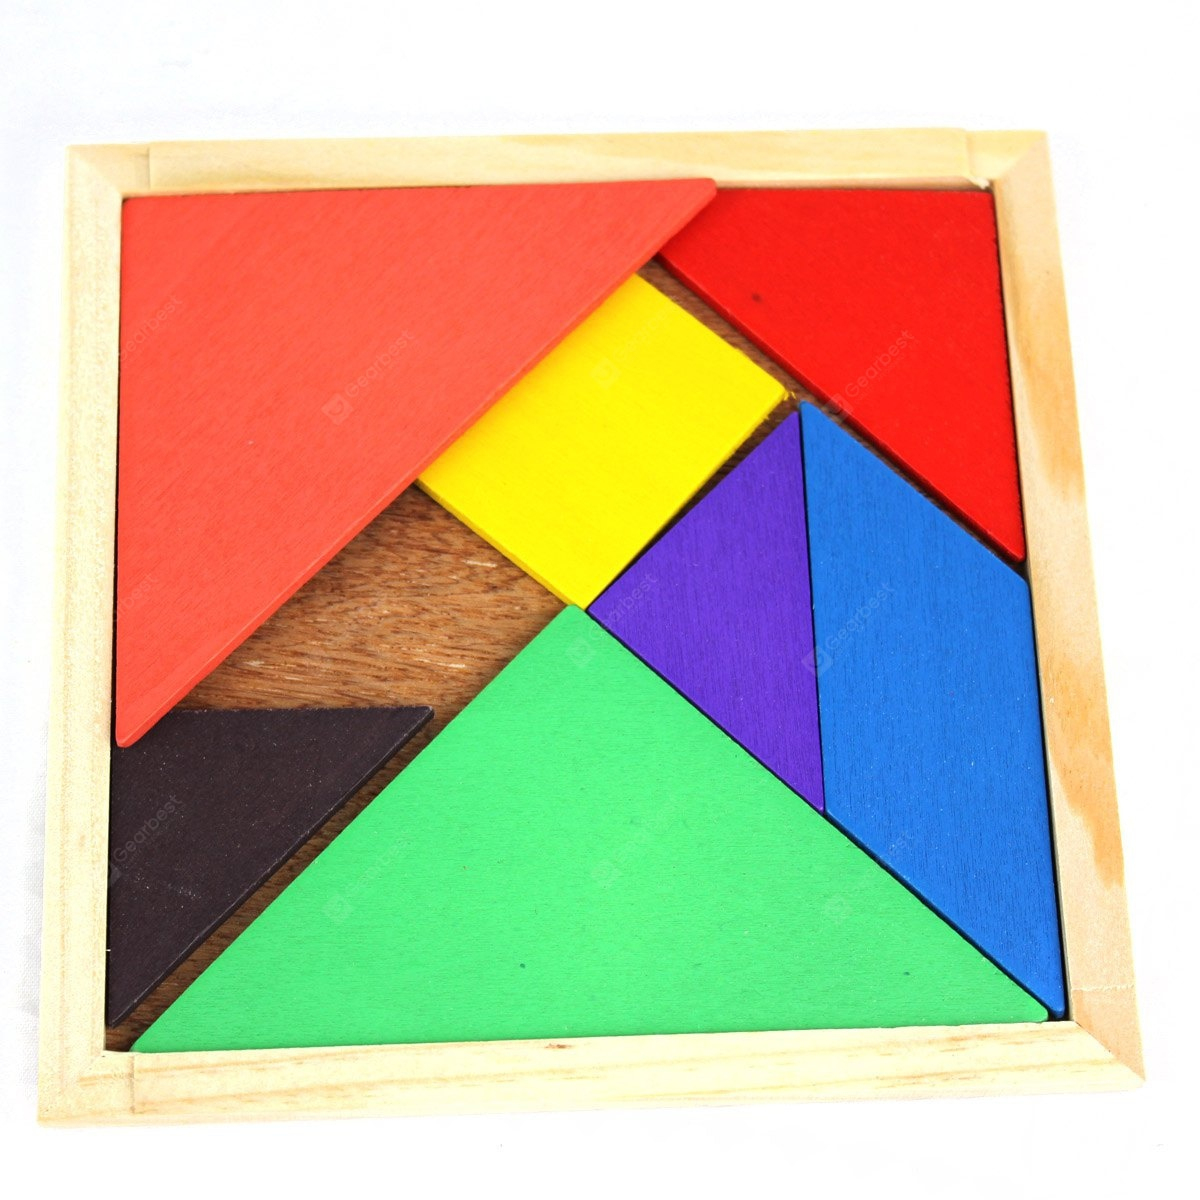 Educational Wooden Tangram Toy Simple Jigsaw Puzzle For Animal Boat Human concernant Tangram Simple 